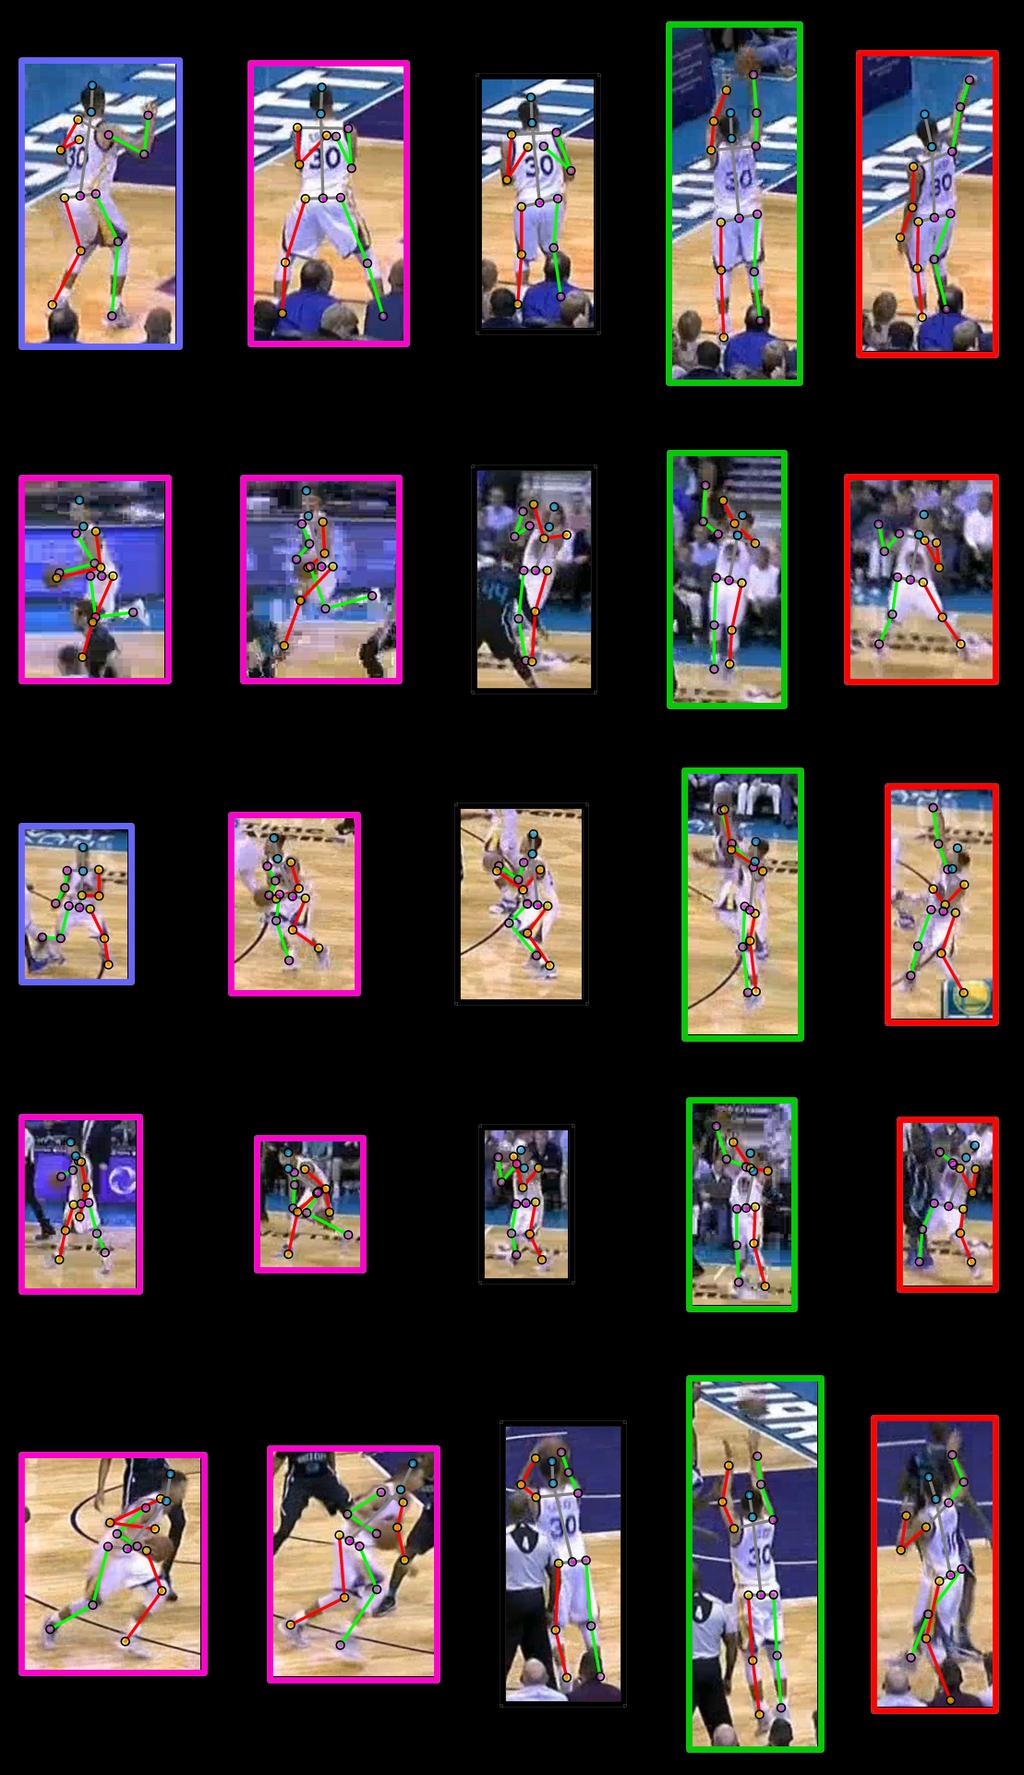 (a) Broadcast View (b) Extracted Pose Figure 5: The (a) broadcast views and (b) corresponding player poses for snapshots of ive of Stephen Curry s shots.